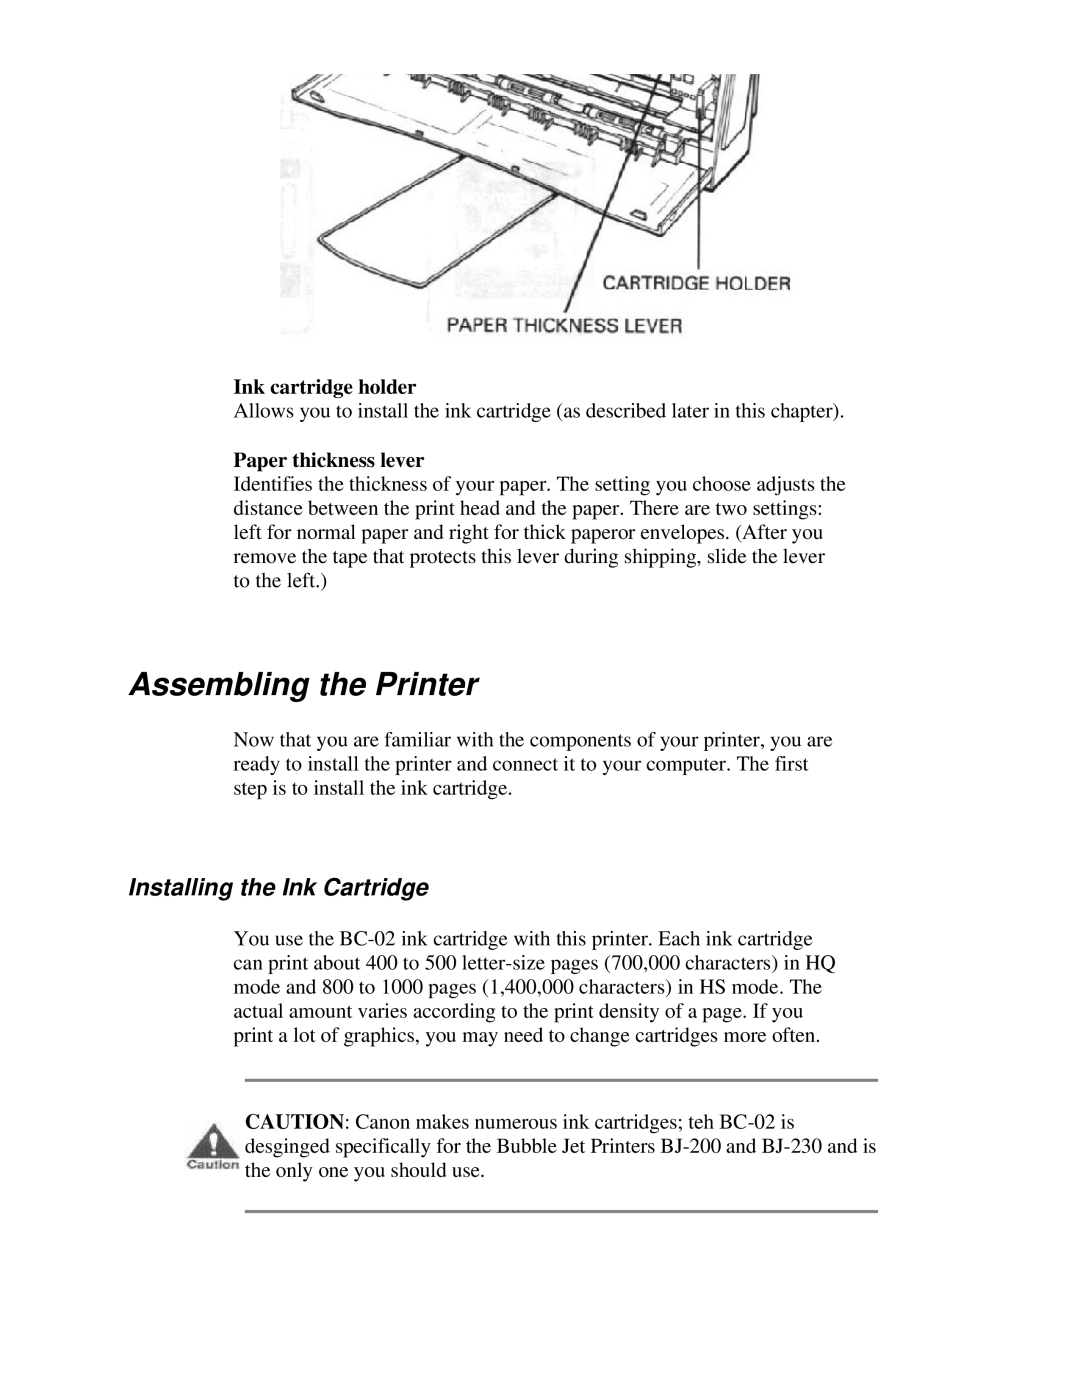 Canon BJ-230 user manual Assembling the Printer, Installing the Ink Cartridge, Ink cartridge holder, Paper thickness lever 